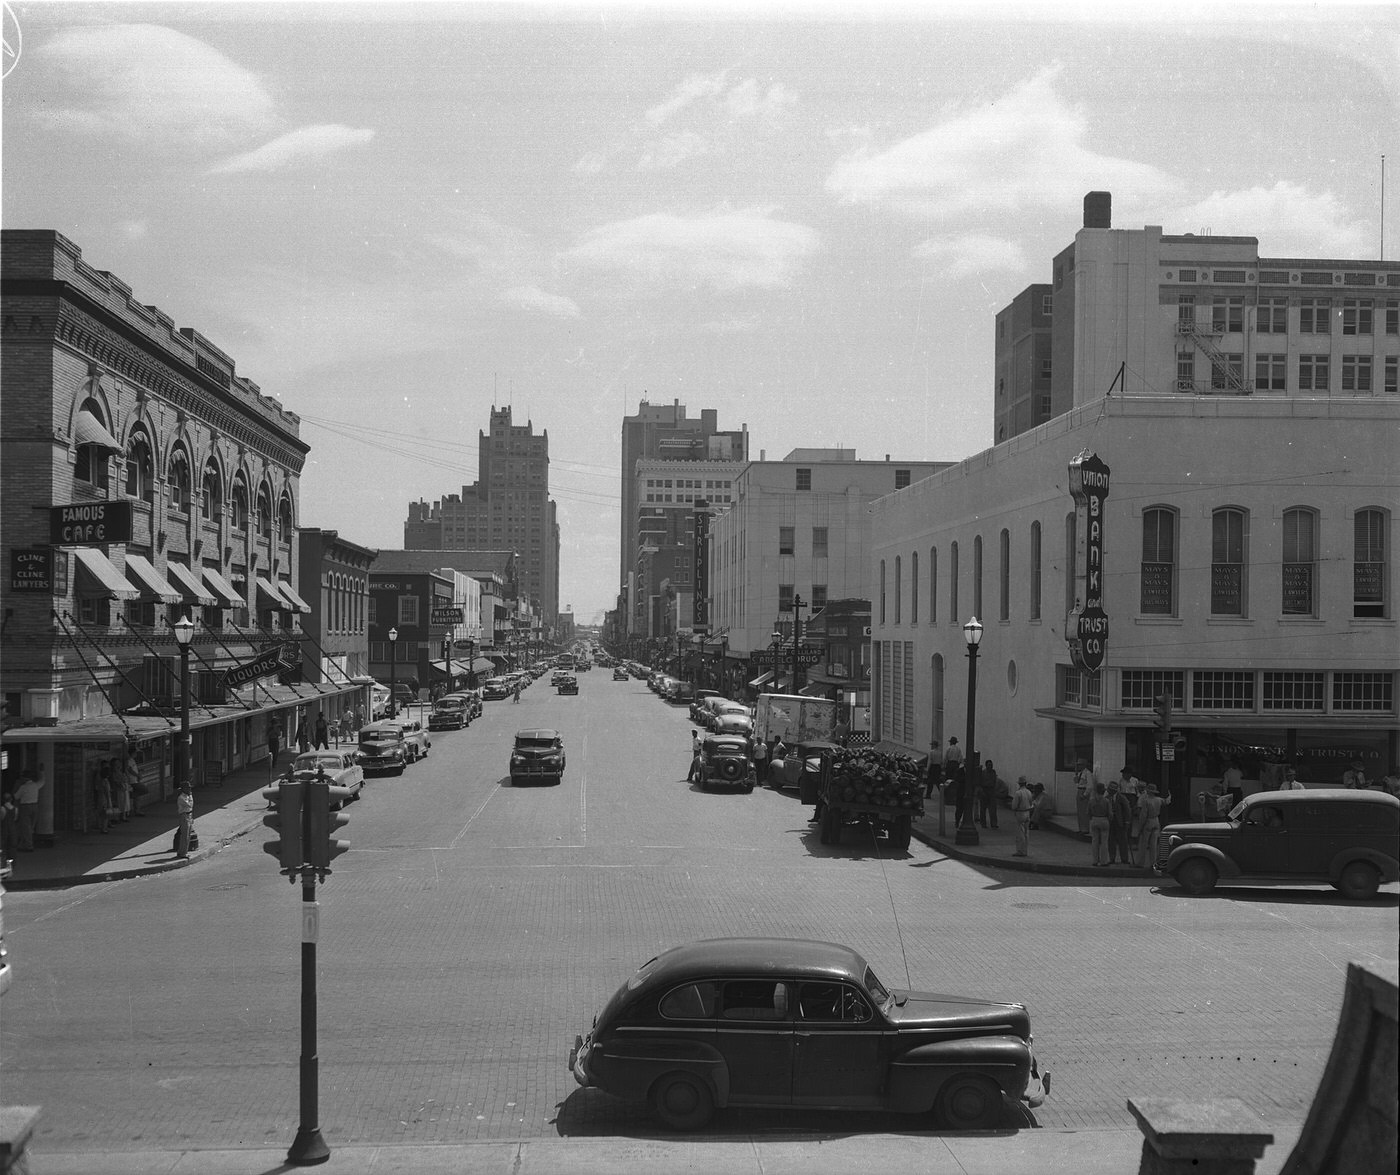 Looking south down Main St. from Tarrant County Court House, Fort Worth in 1949